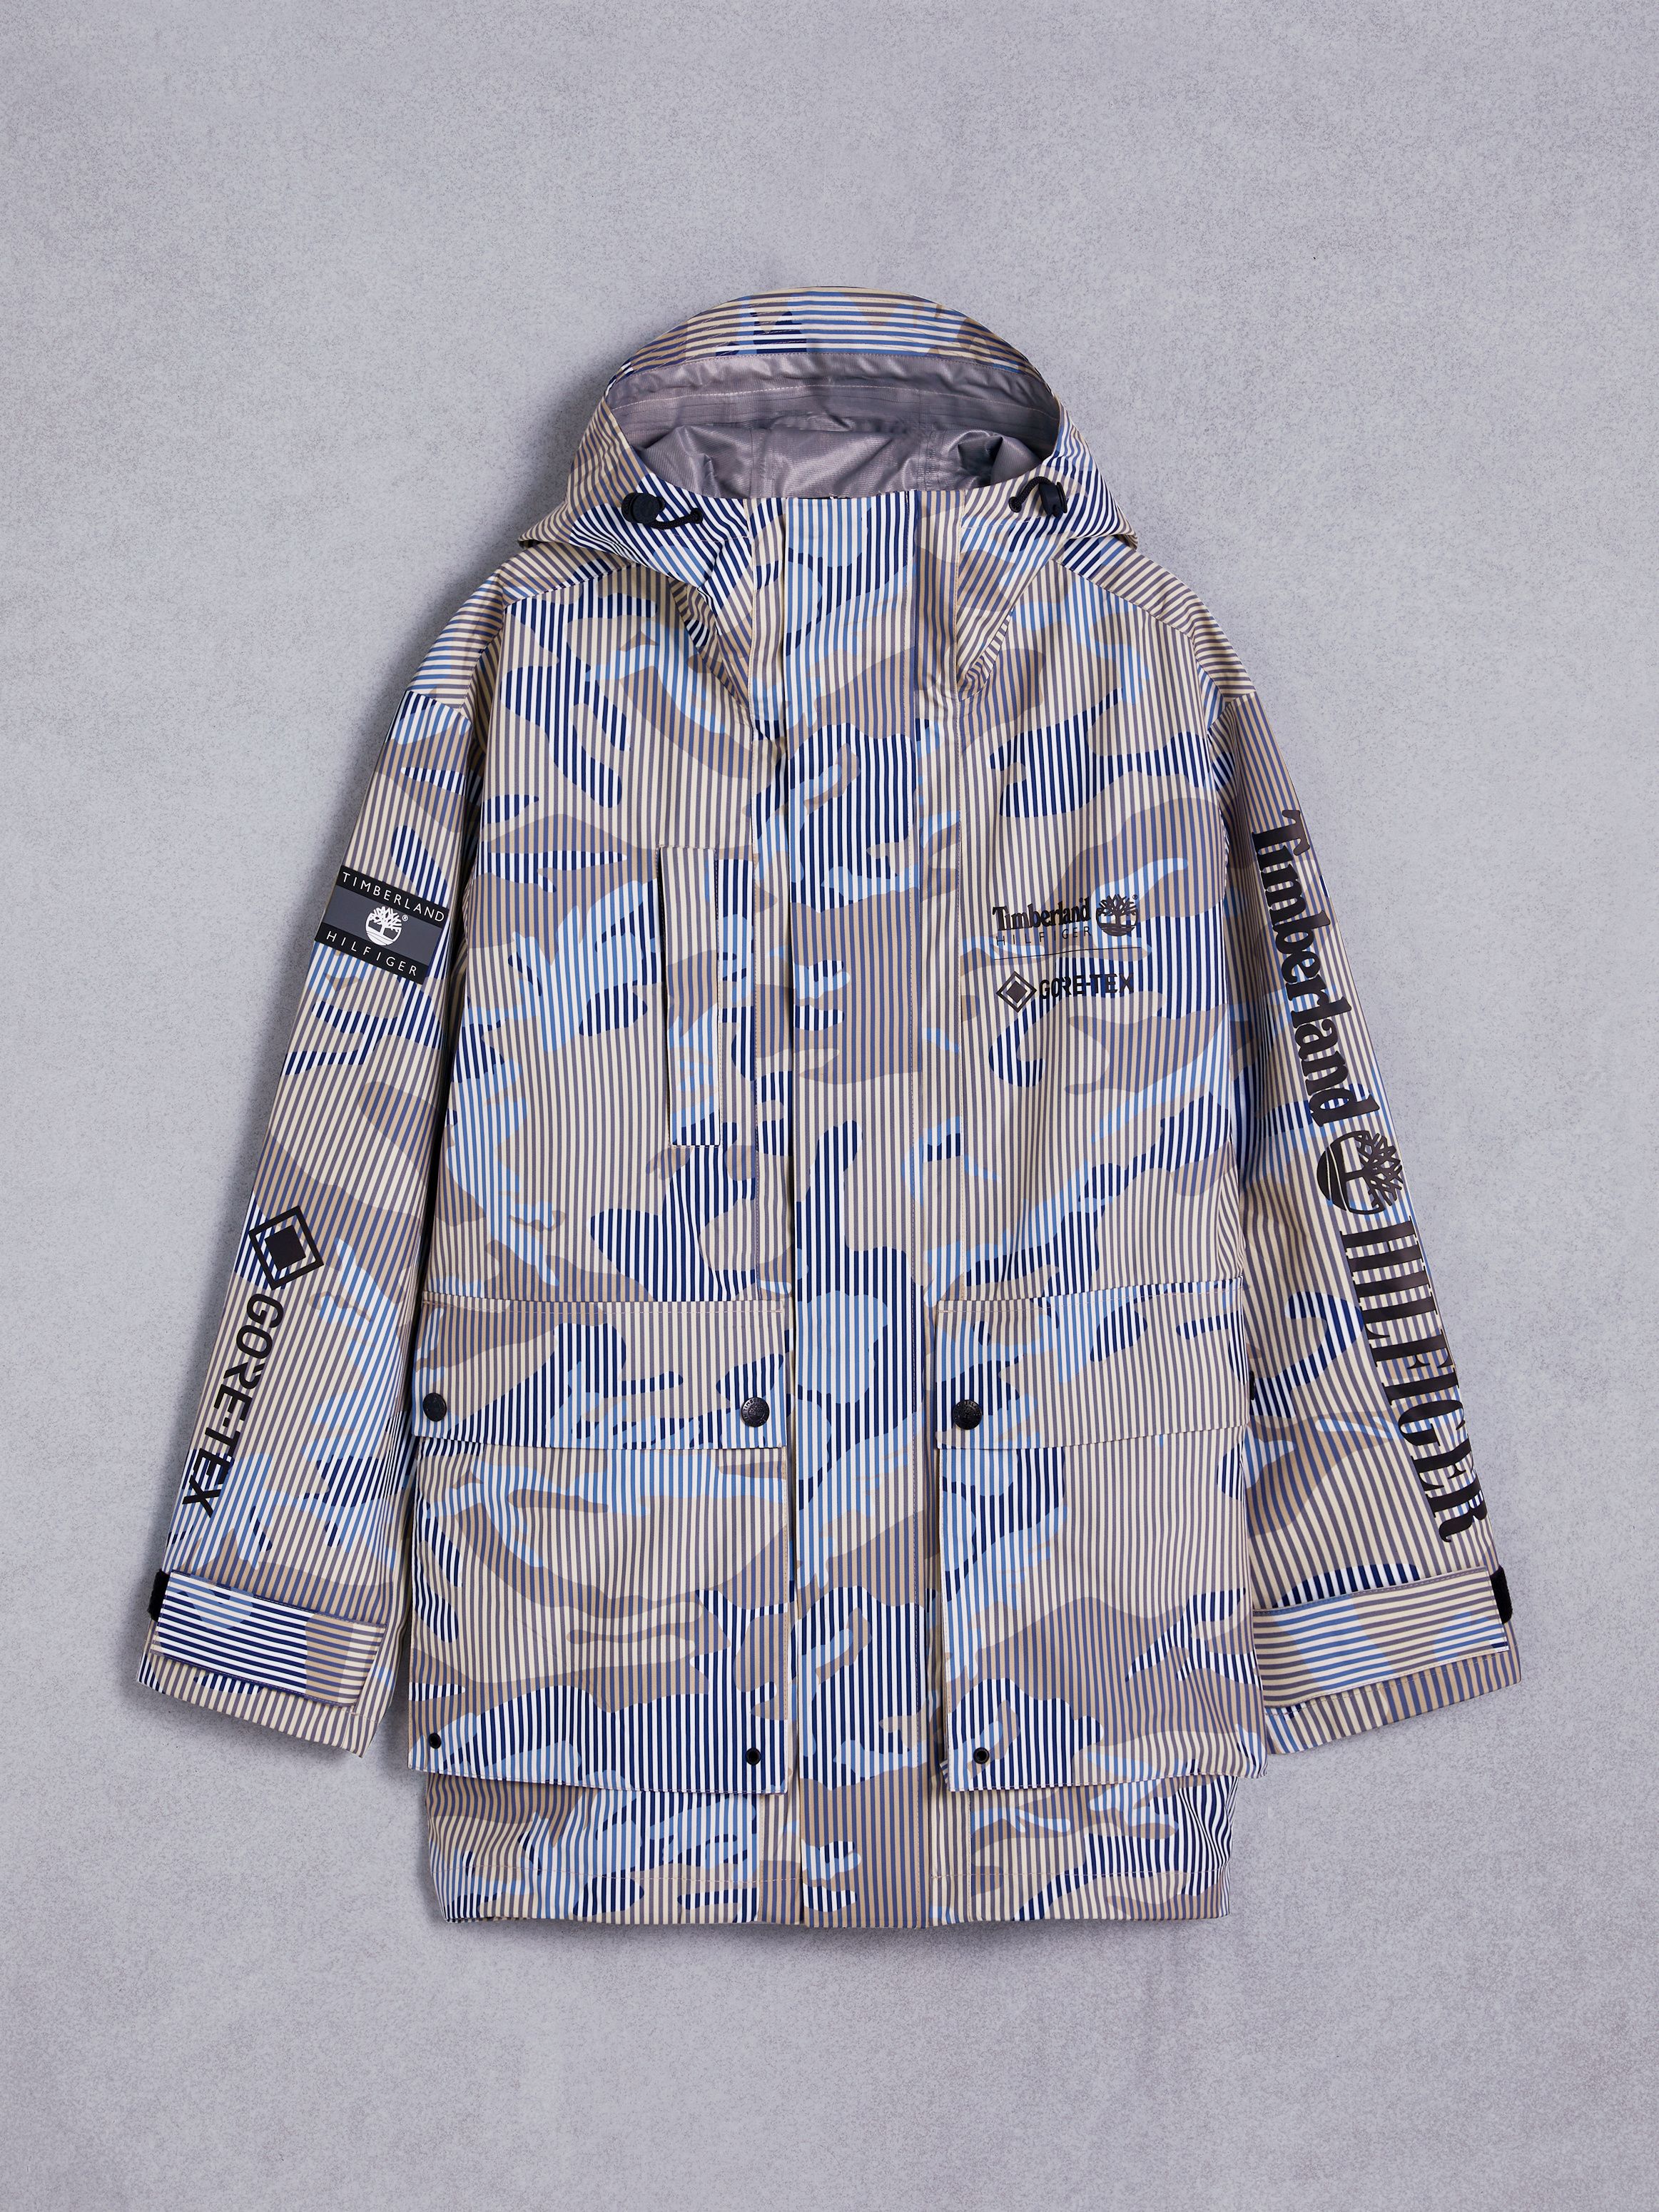 TOMMY X TIMBERLAND GORE-TEX Camo Parka